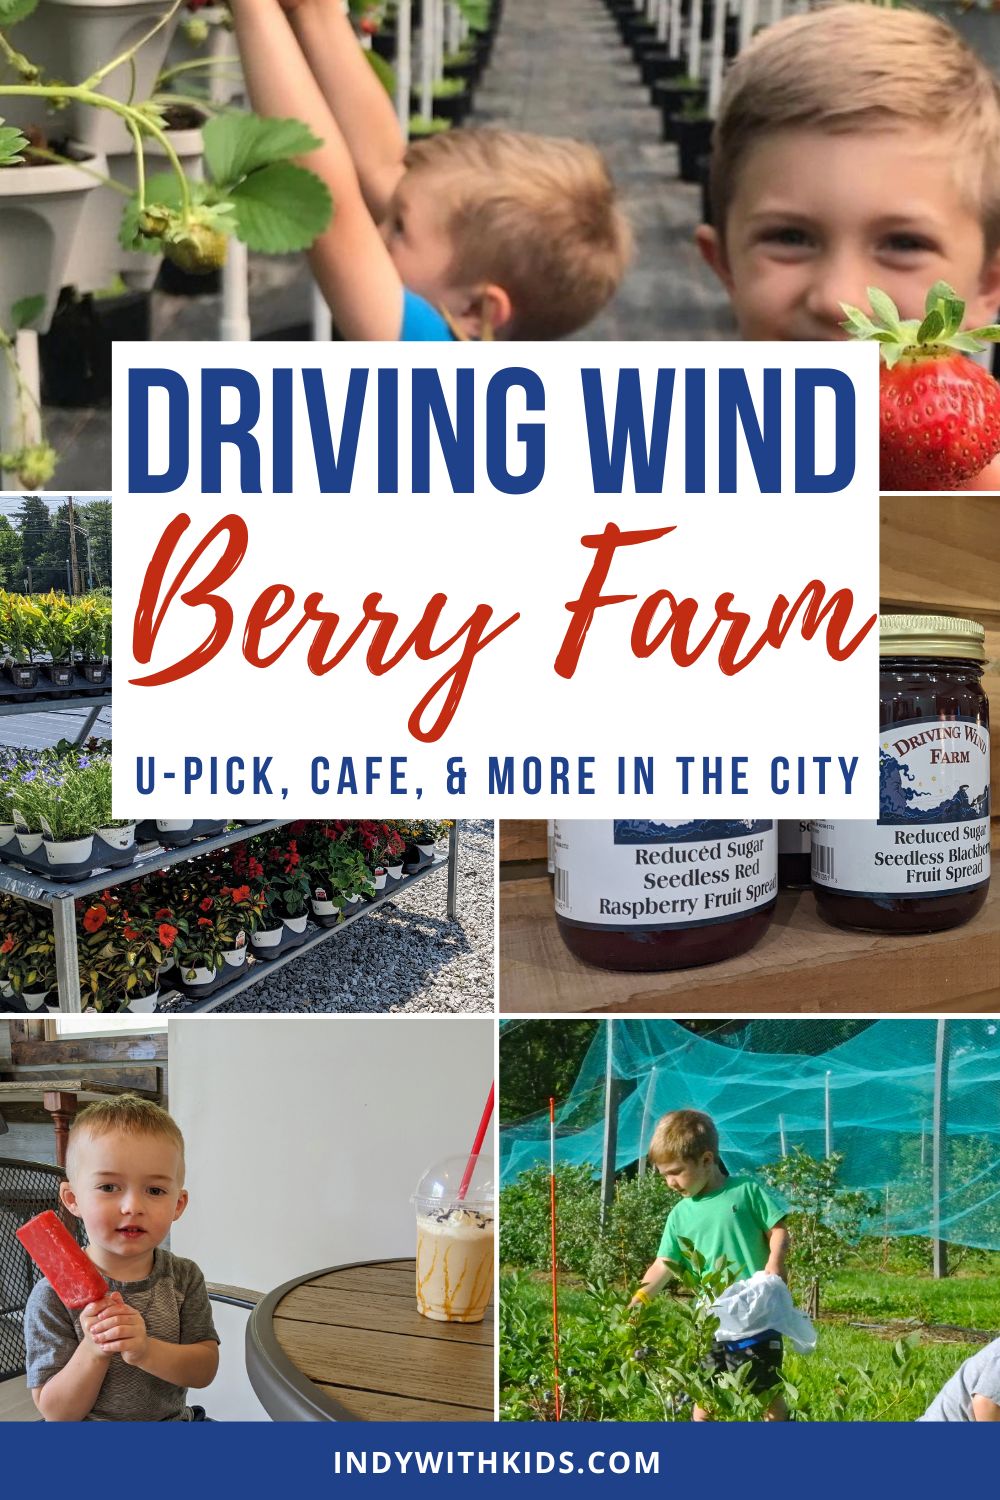 Driving Wind Berry Farm offers U-pick, a farm store, a cafe, and more!